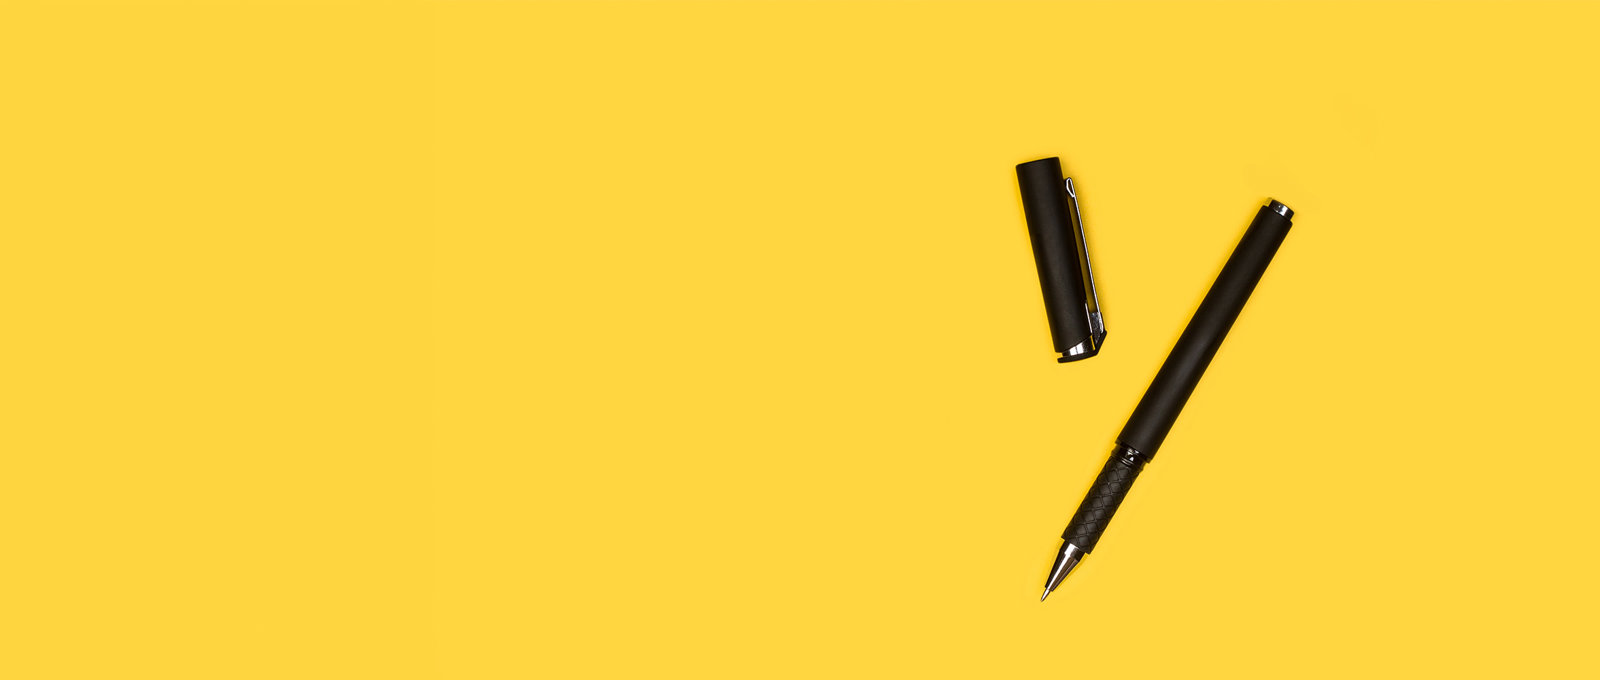 Photo of a black pen with the lid removed lying on a yellow surface